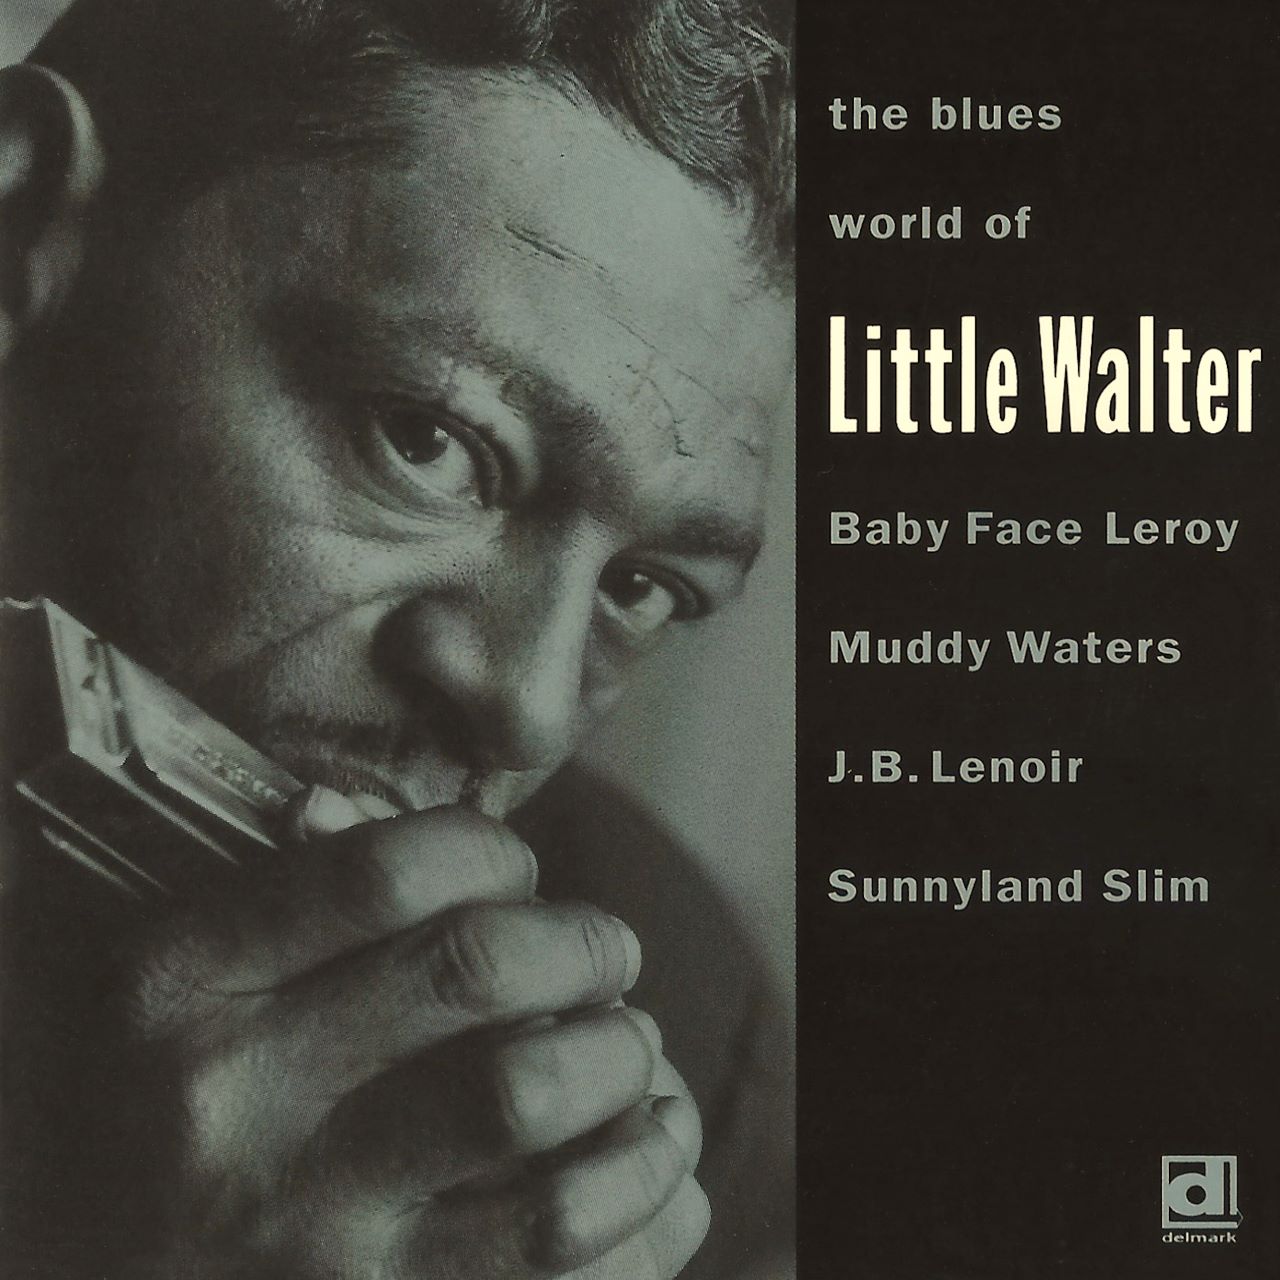 Little Walter – The Blues World Of Little Walter cover album